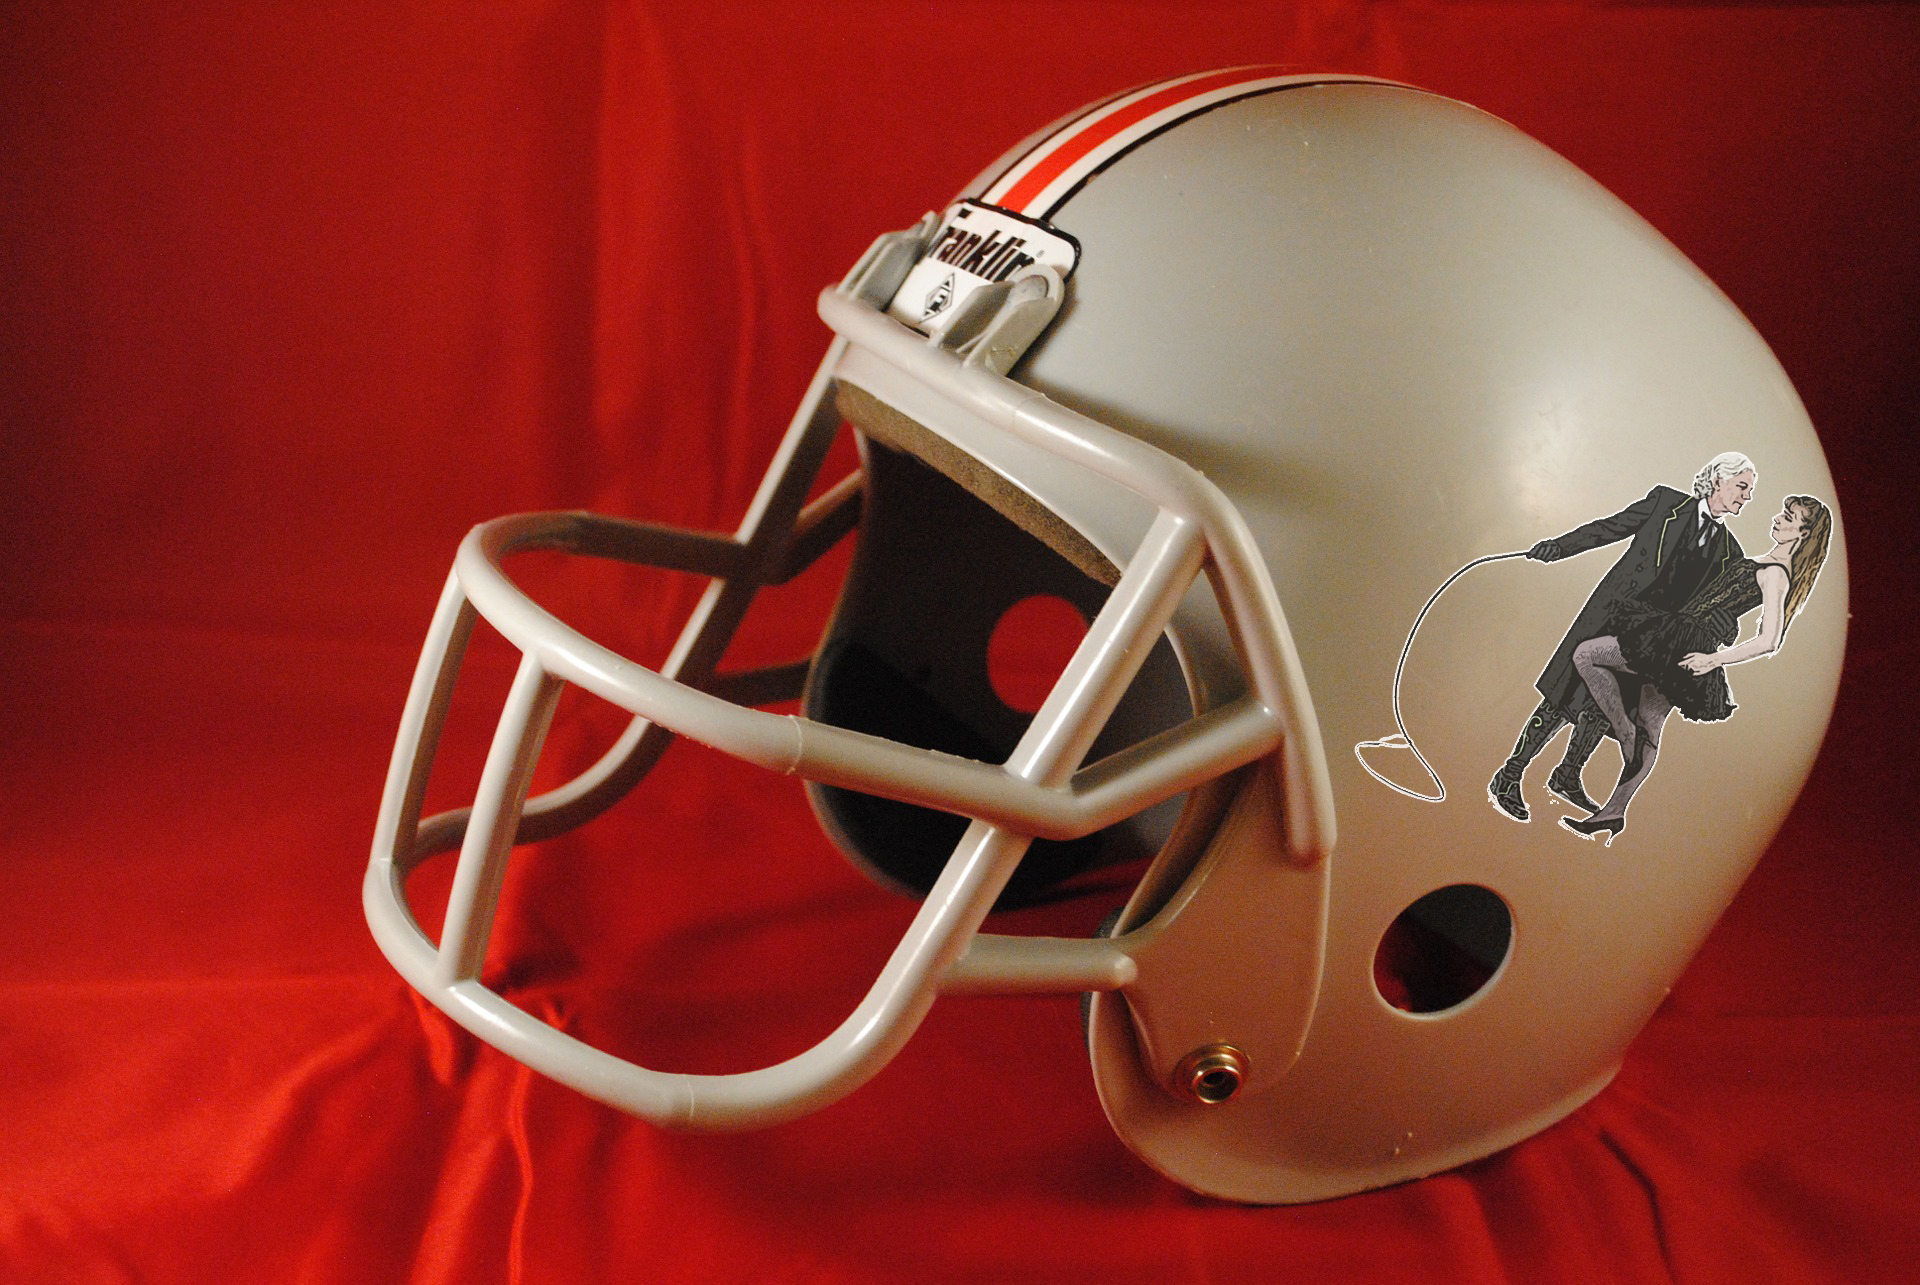 This Georgia Crackers helmet will never hit the field, but man, we absolutely love it’s authenticity!